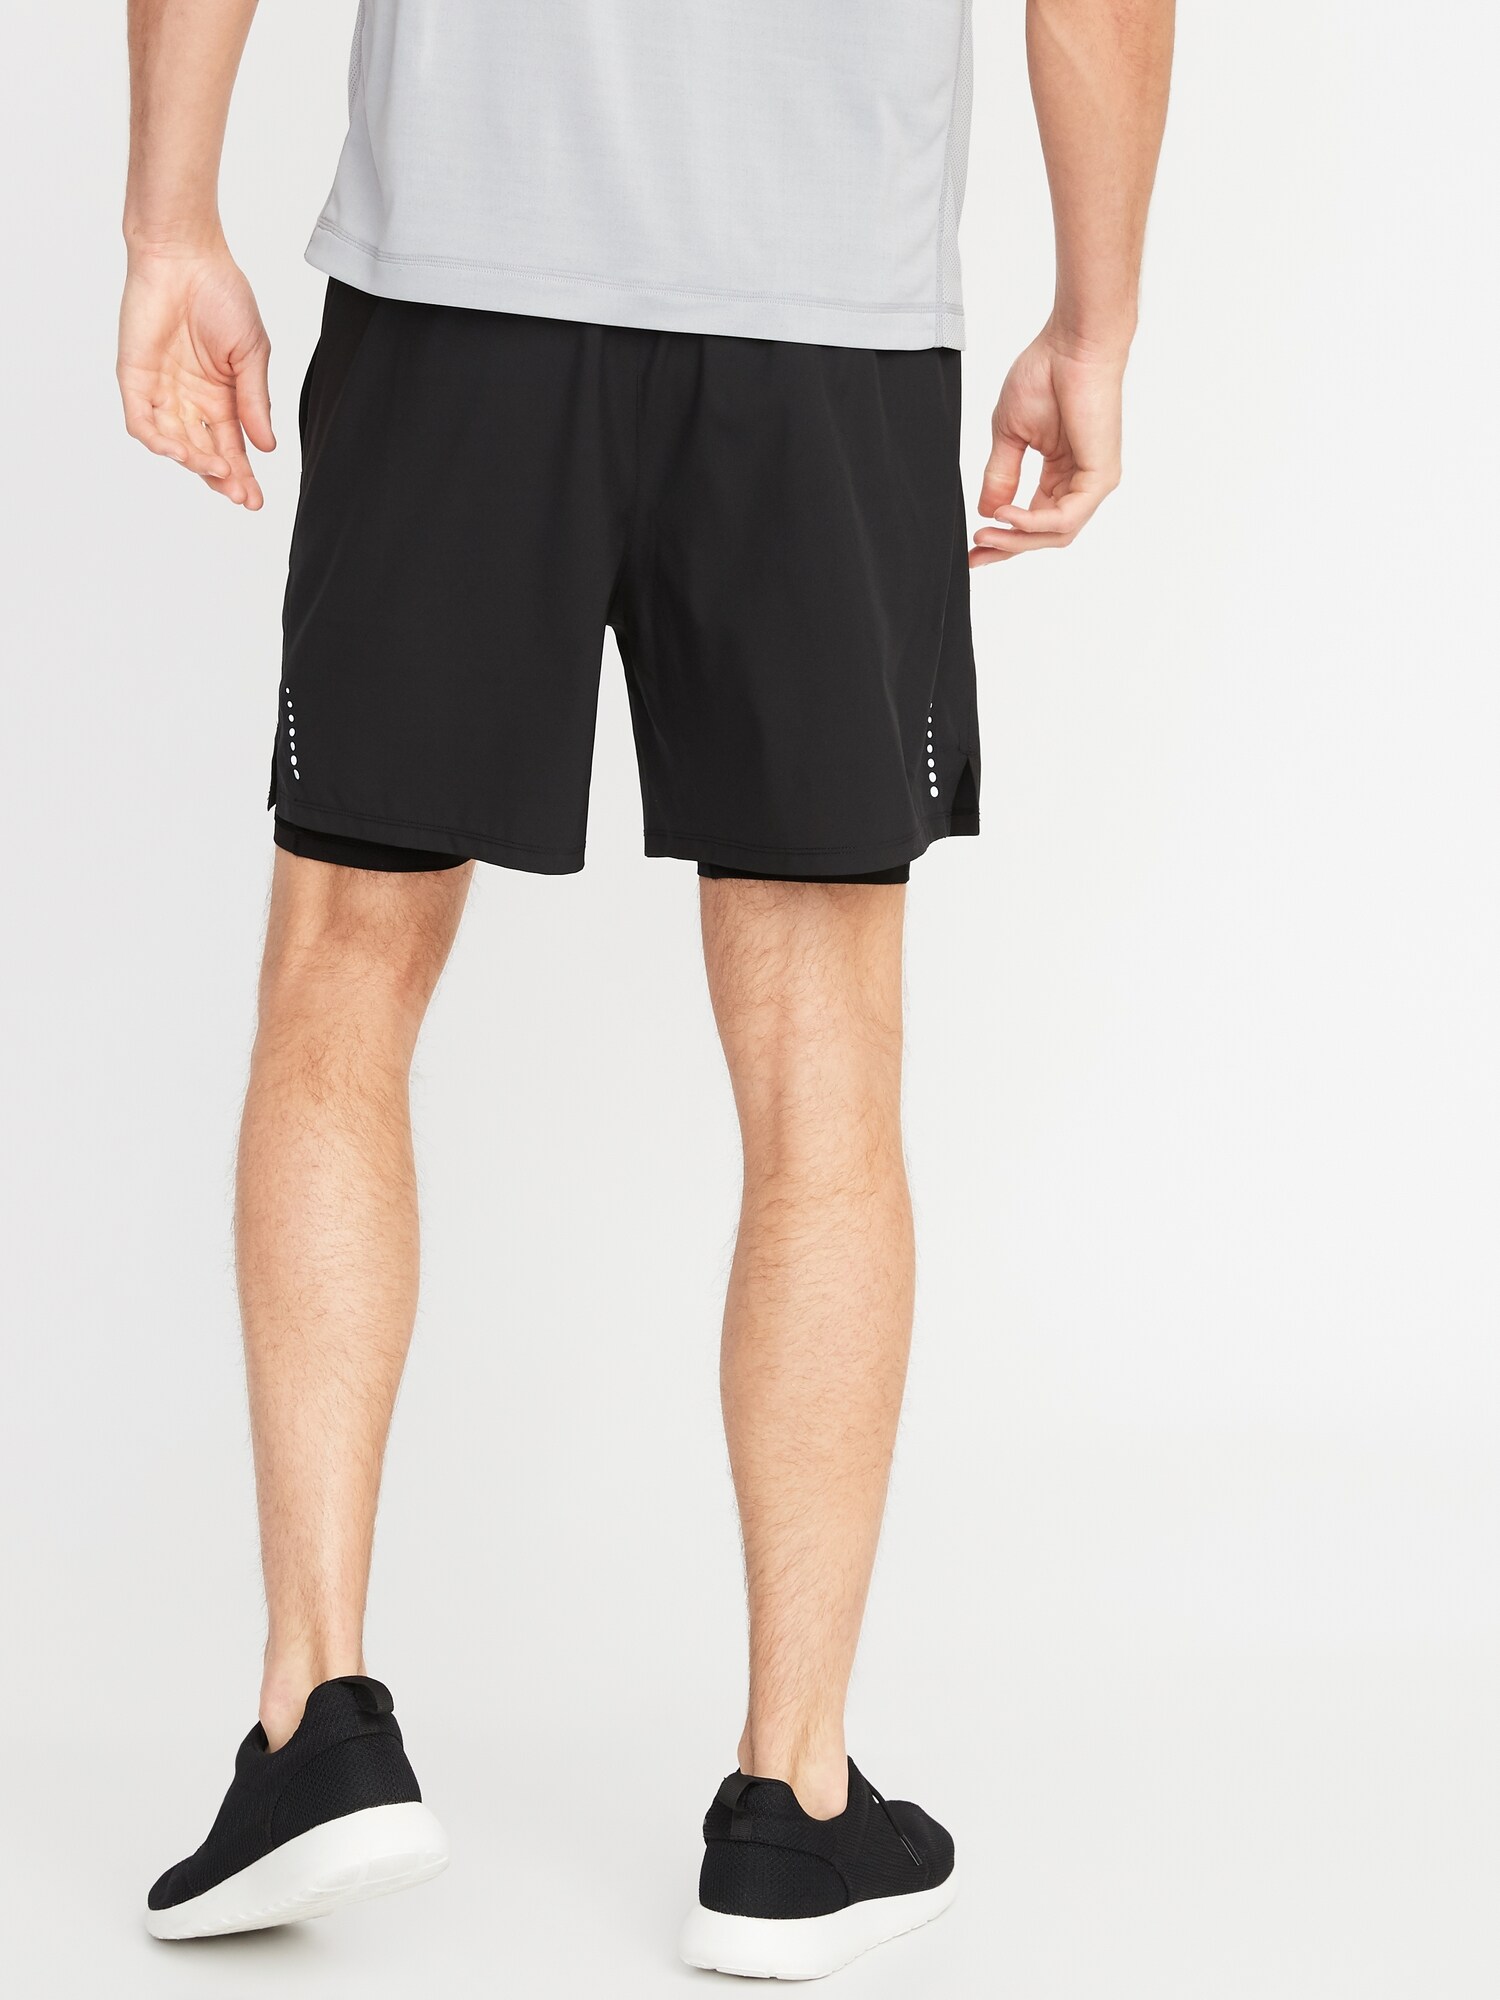 2-in-1 Go-Dry 4-Way Stretch Run Shorts for Men - 7-inch inseam | Old Navy